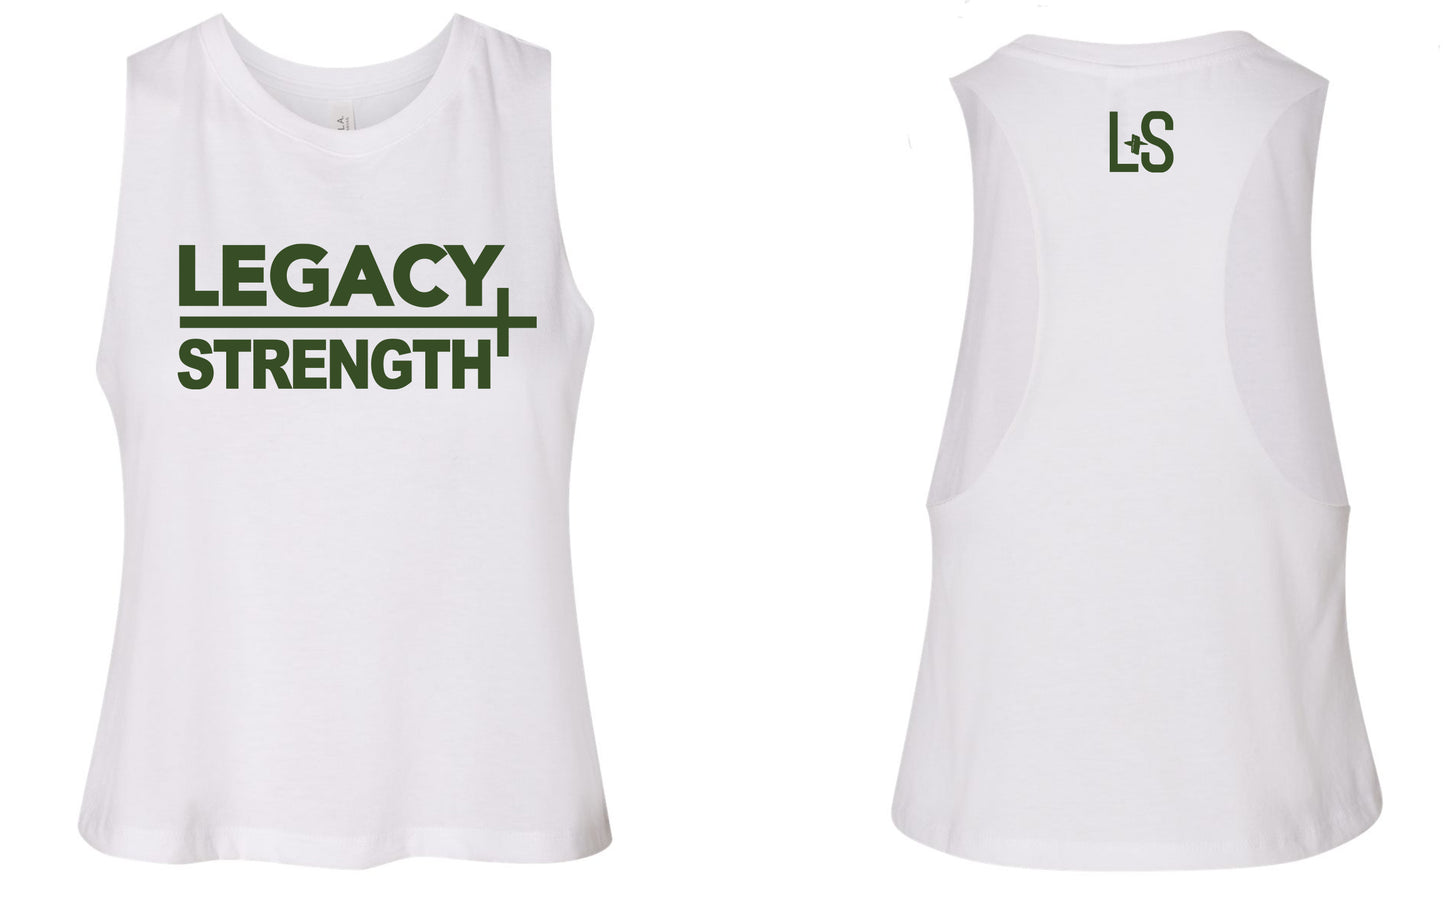 Legacy + Strength Ladies Cropped Muscle 6682